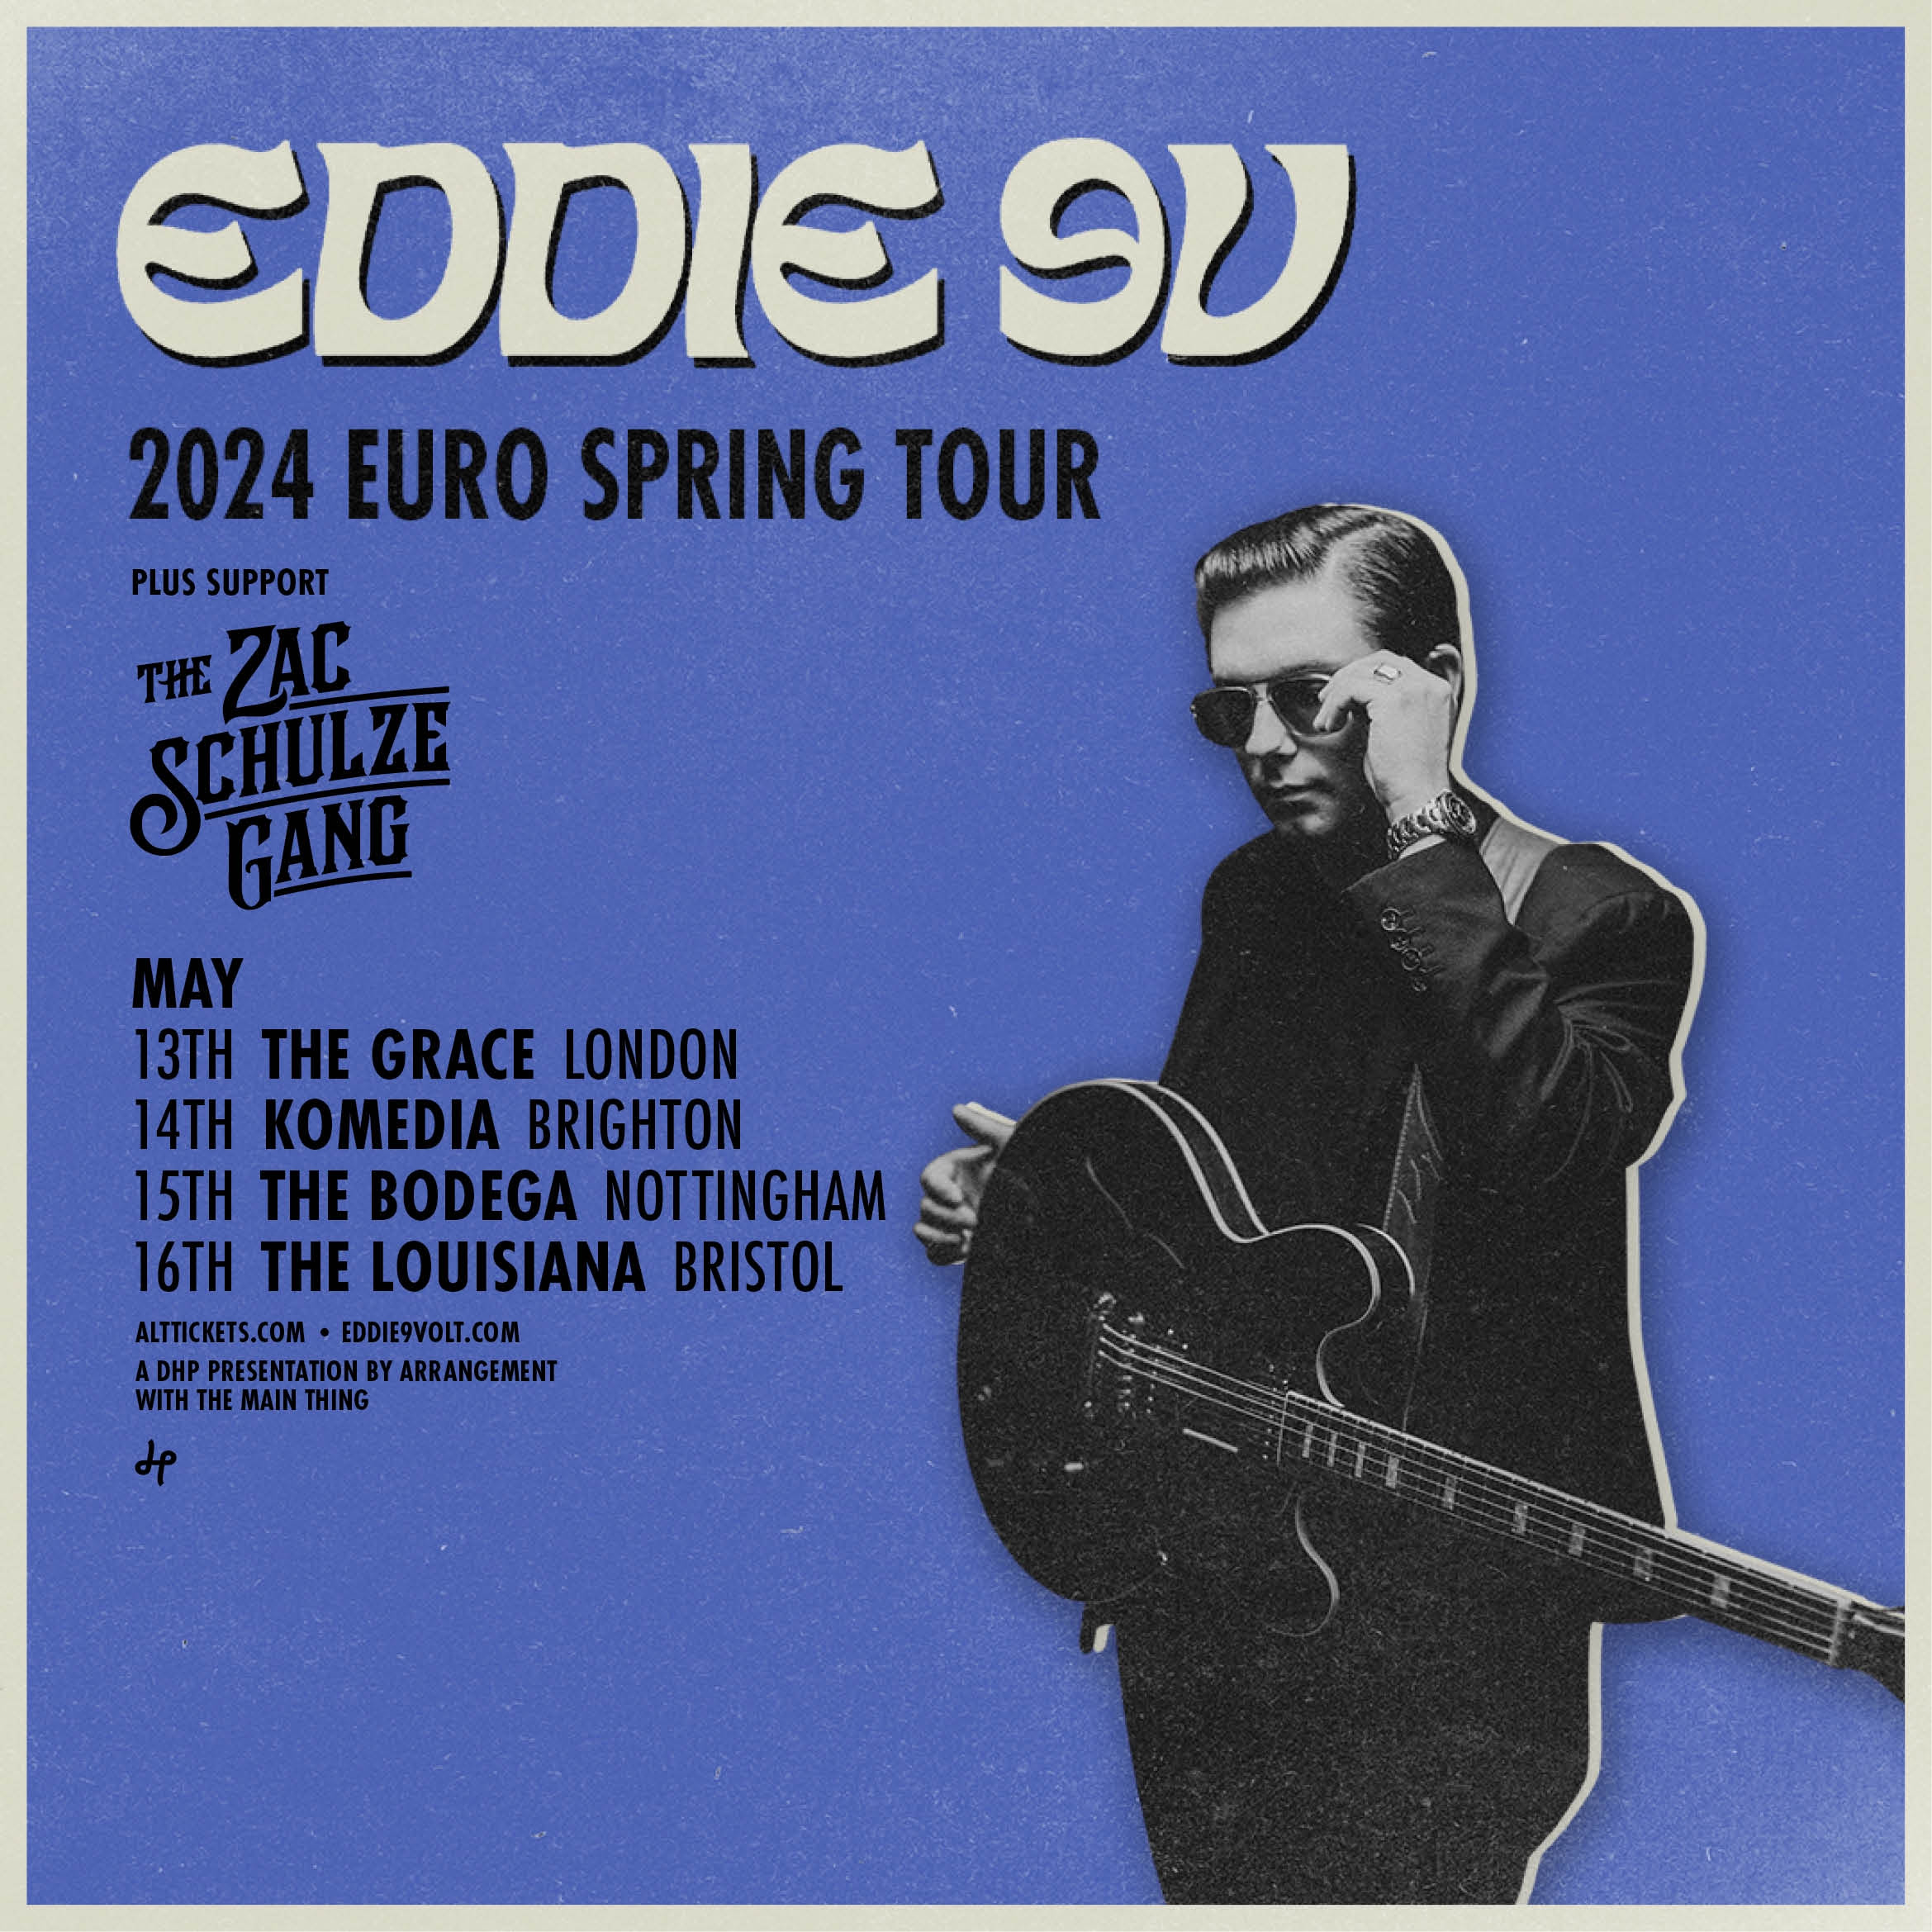 Eddie 9V releases new single "Saratoga" ahead of May 2024 UK Tour